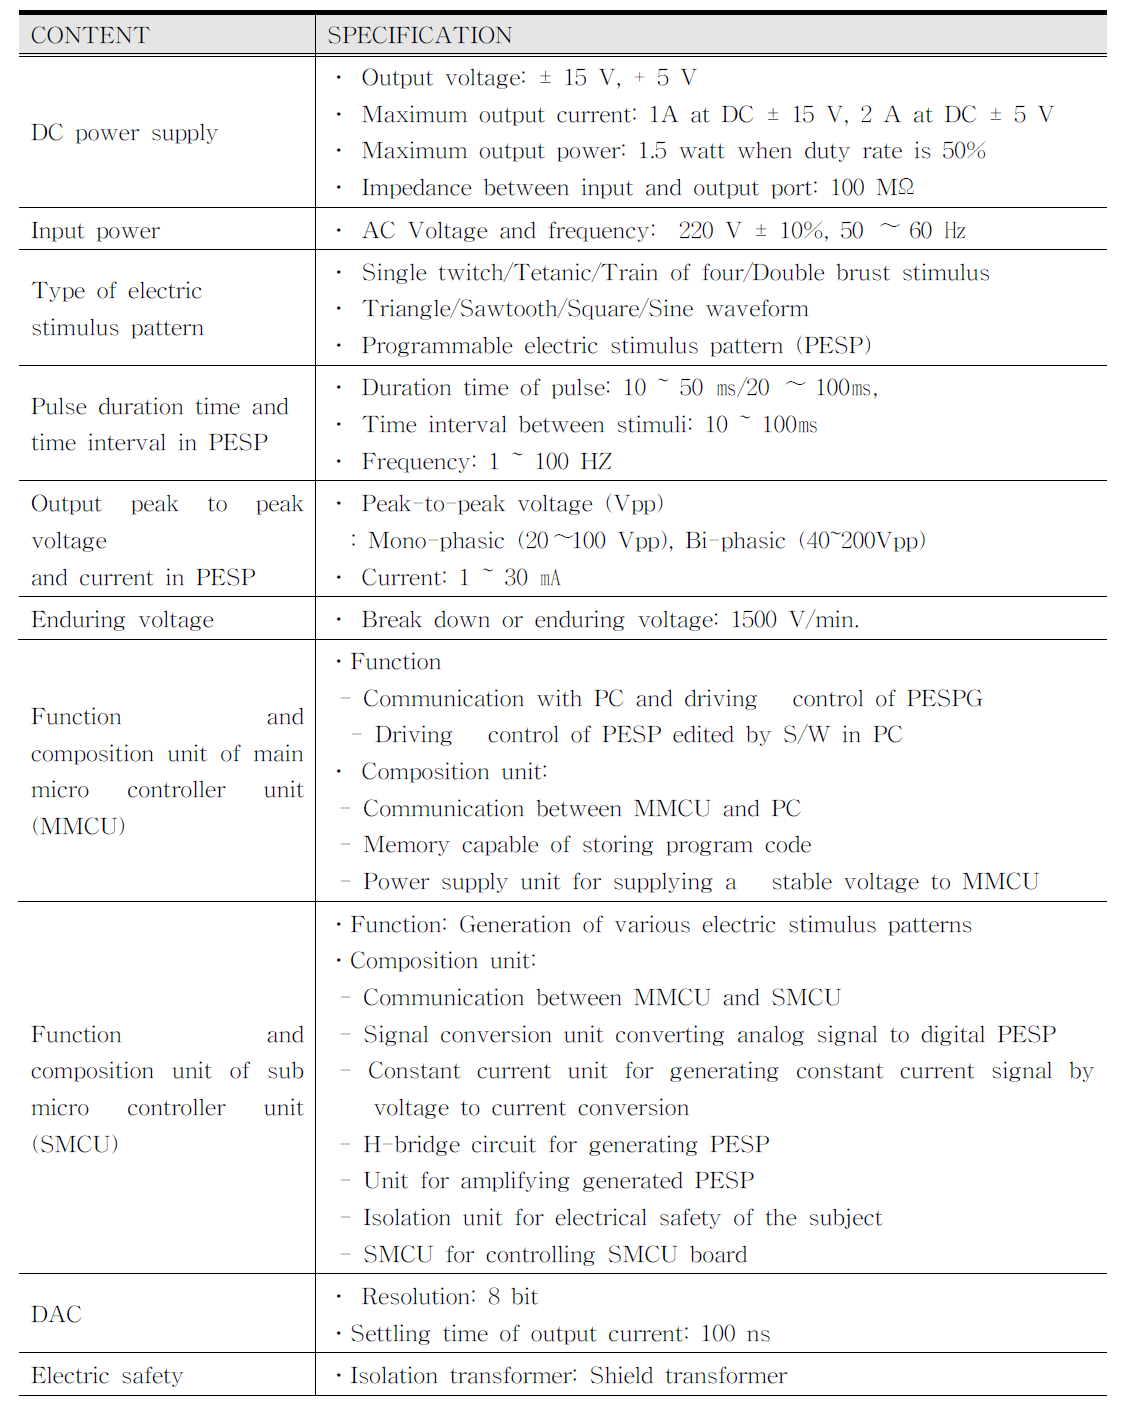 Specification of PMES